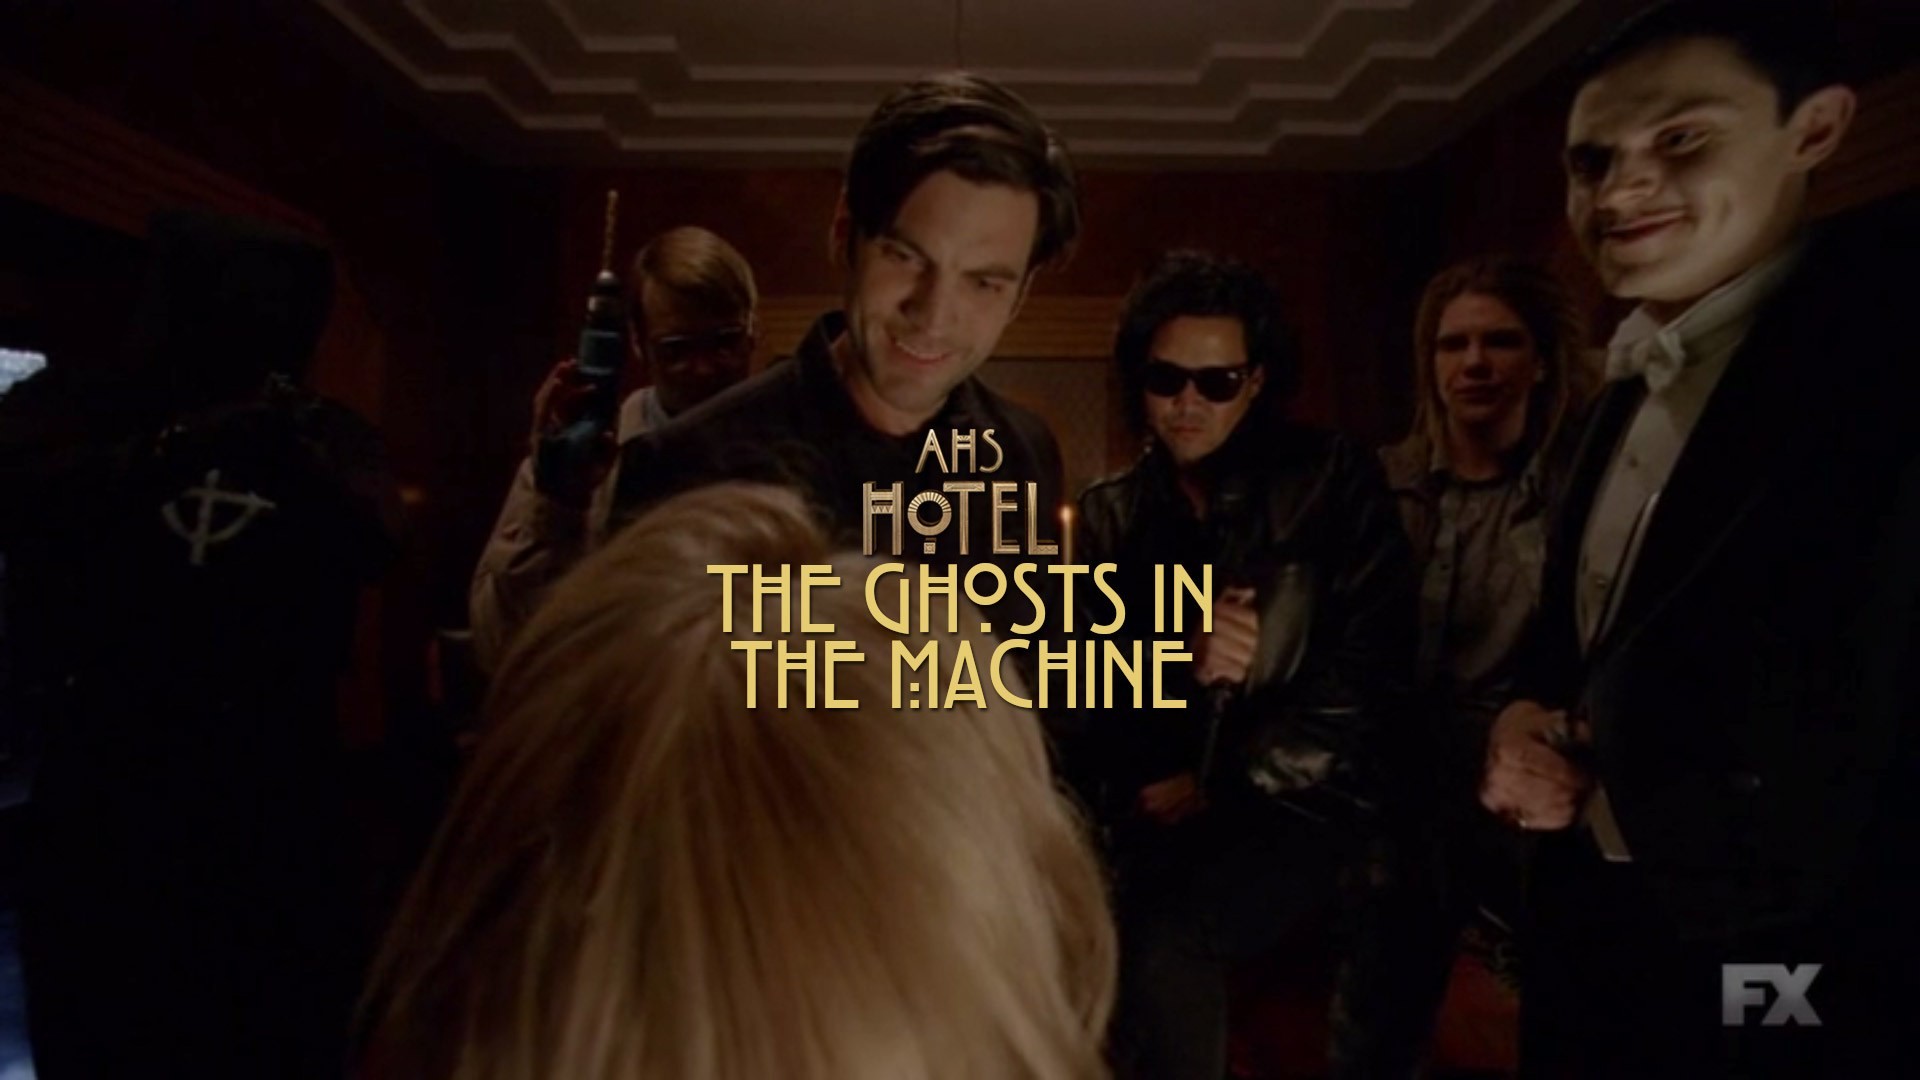 1920x1080 American Horror Story Hotel 'The Ghosts In The Machine'